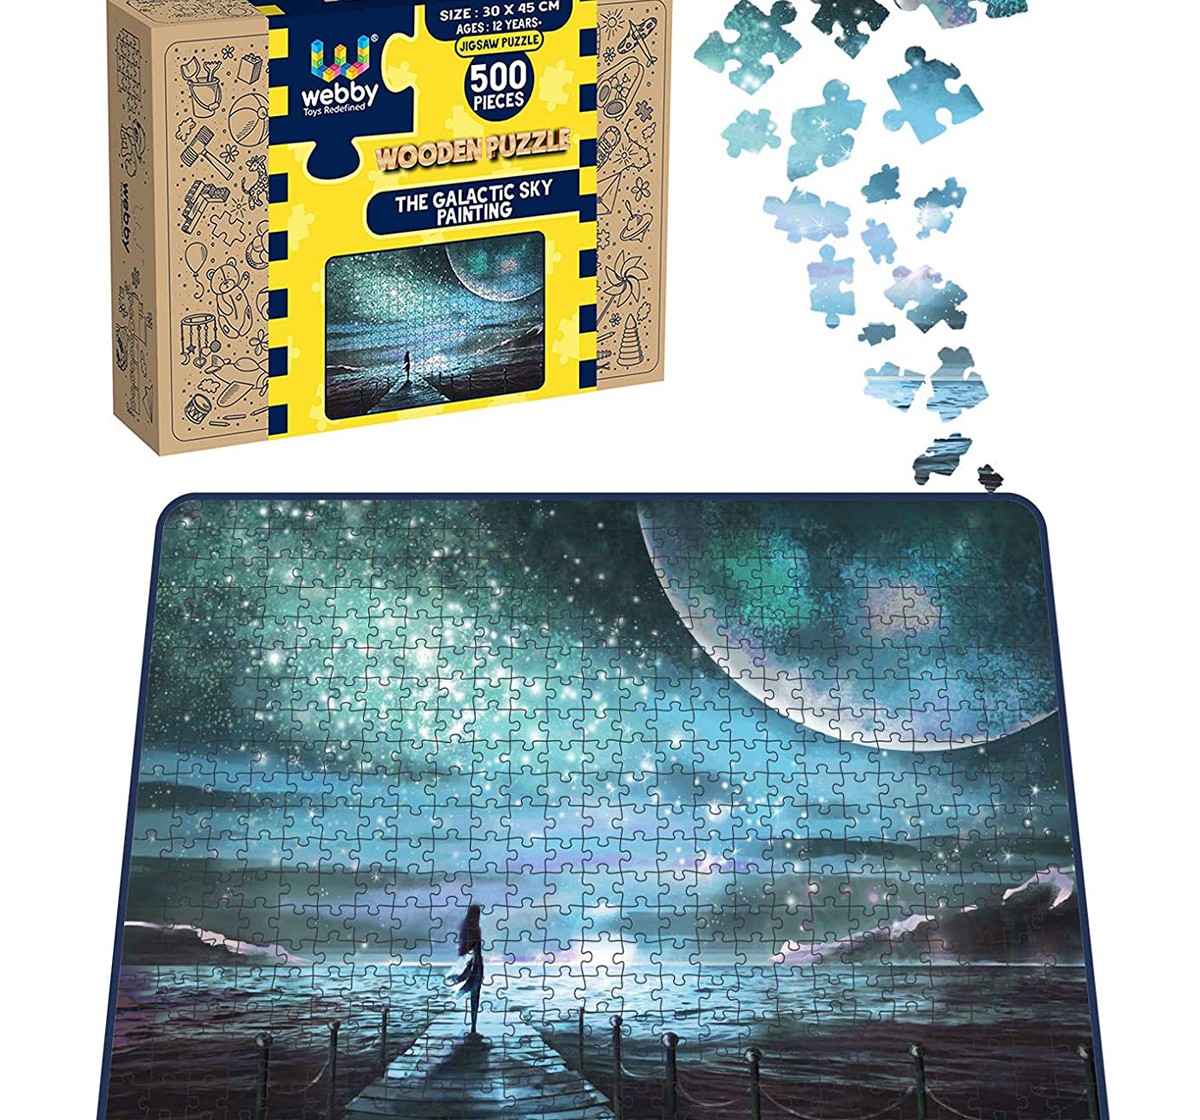 Webby Galactic Sky Painting 500 Pieces Wooden Puzzle for Kids 7Y+, Multicolour